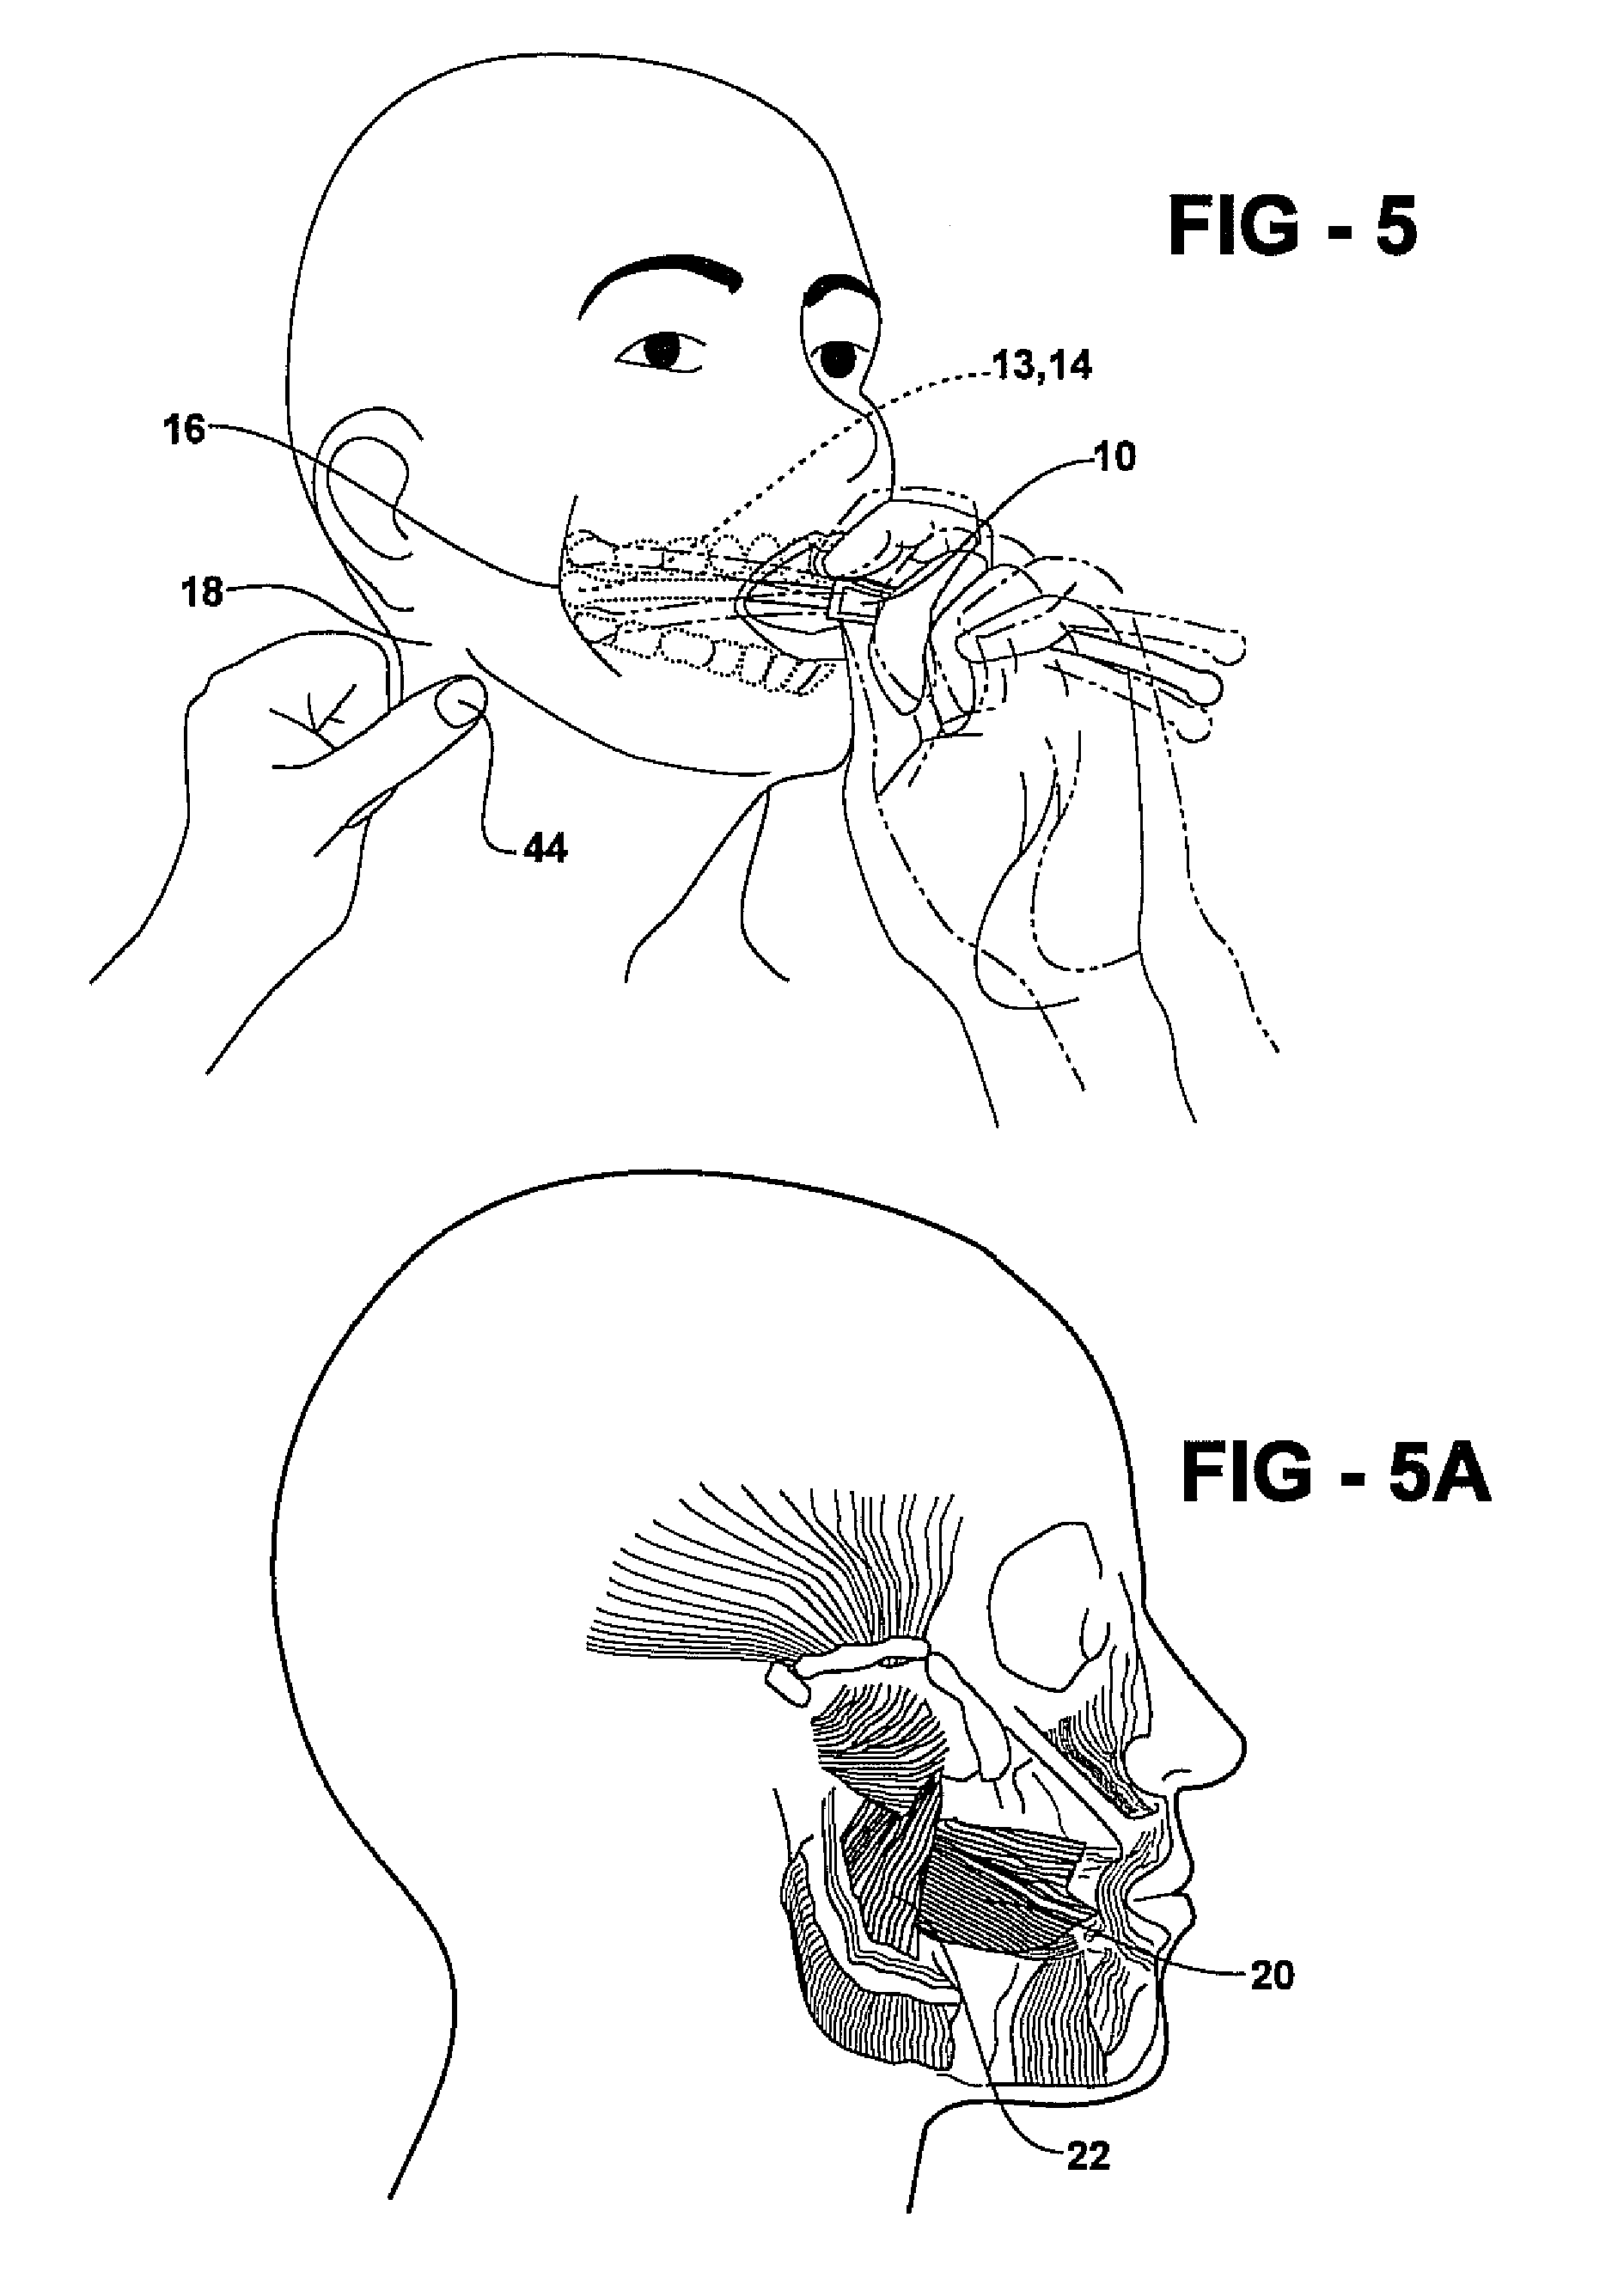 Method and apparatus for intra oral myofascial trigger point therapy